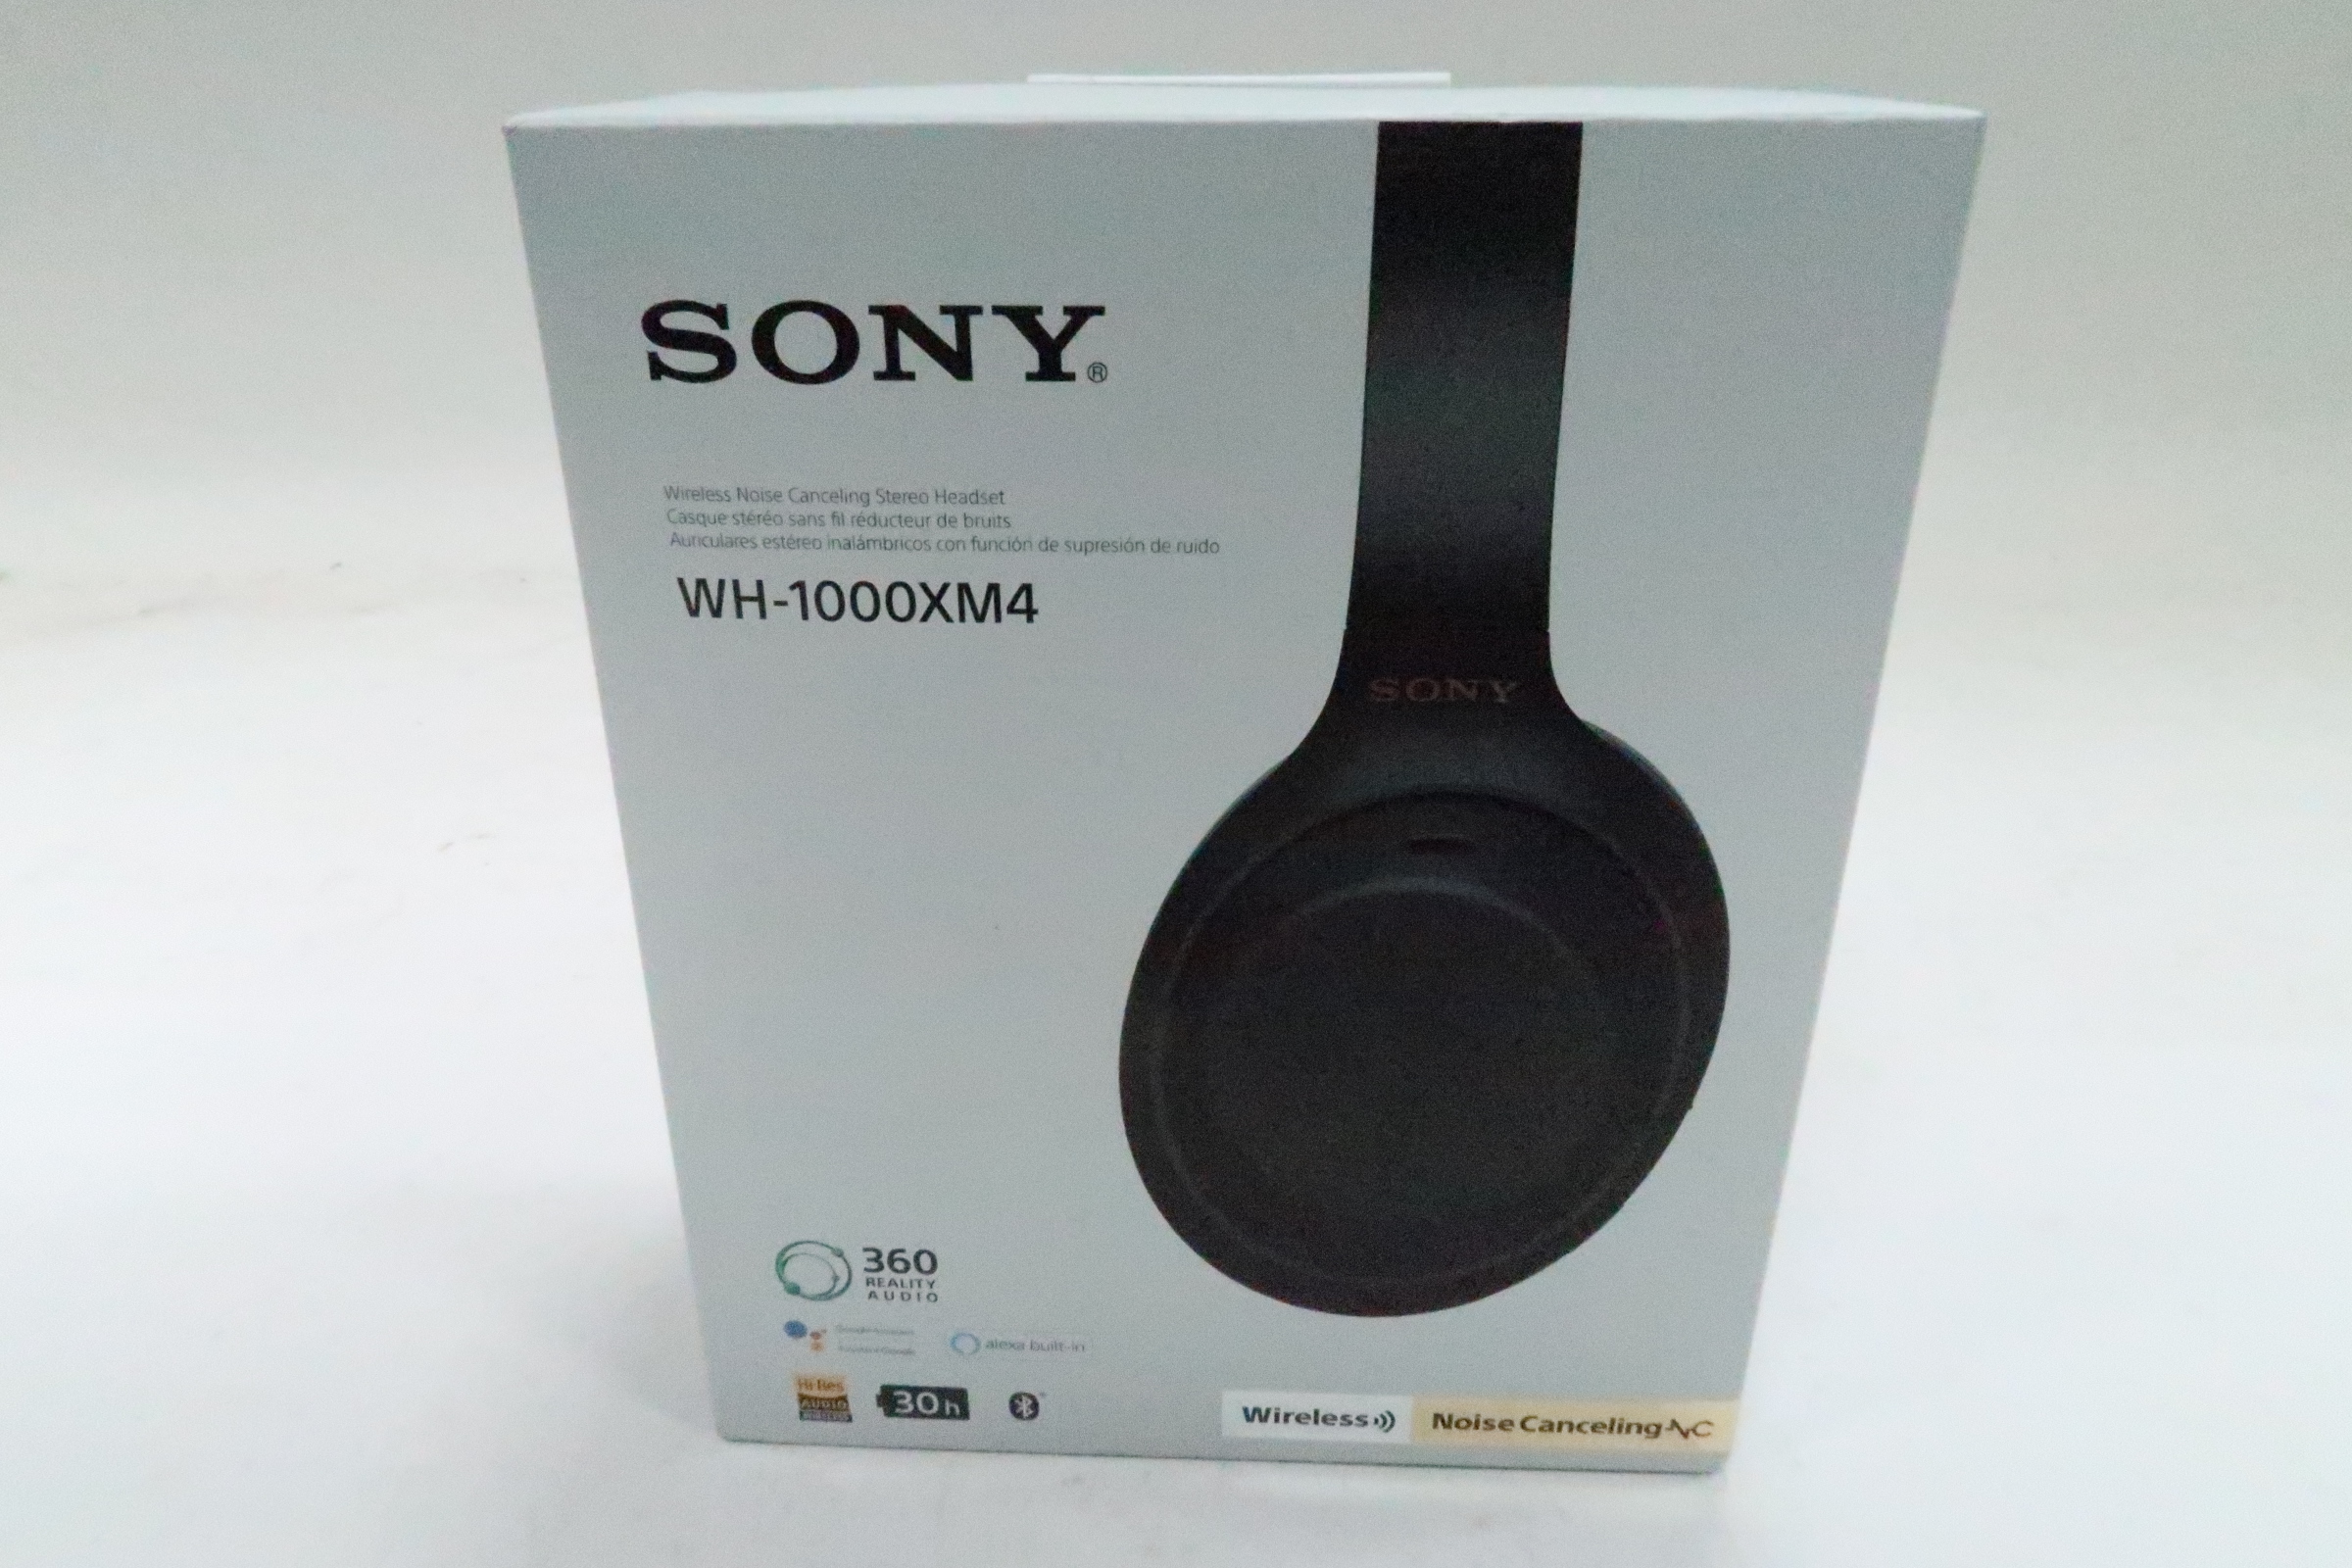 Sony WH-1000XM4 Wireless Noise-Cancelling Over-the-Ear Headphones - Black  5615